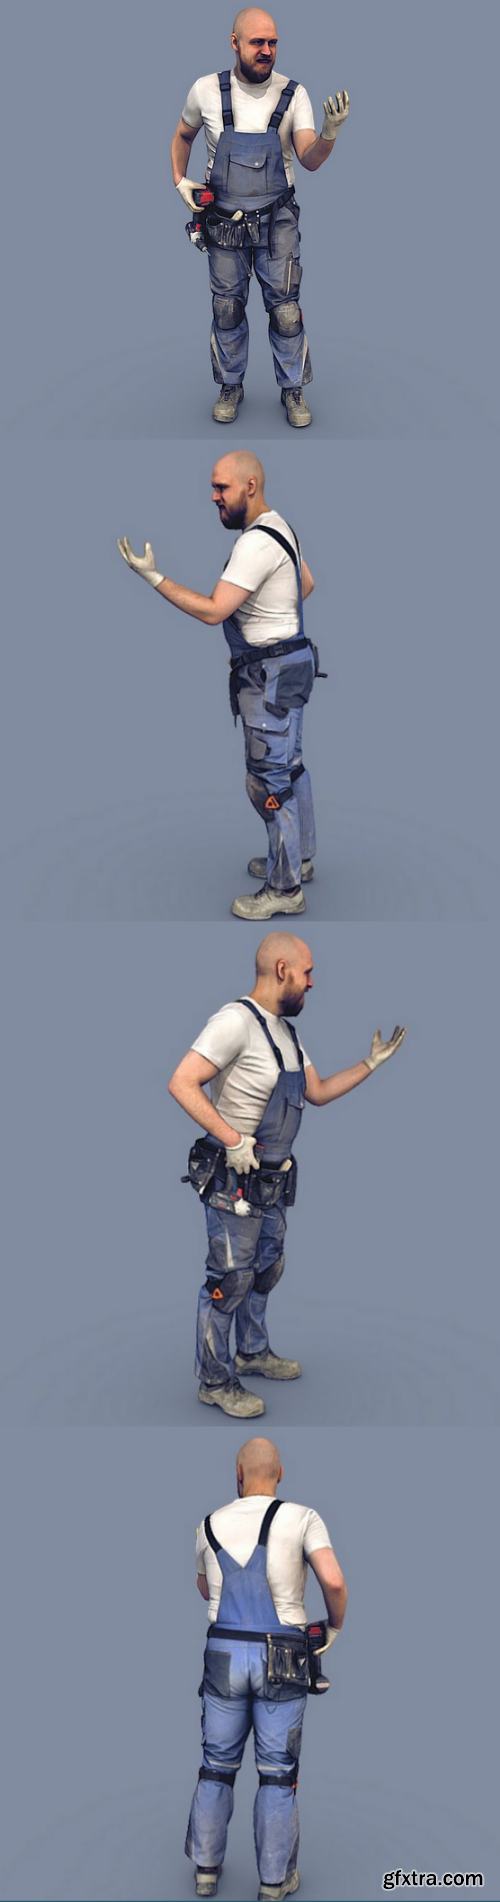 Bald Worker in Overalls With an Indignant Face 3D Model